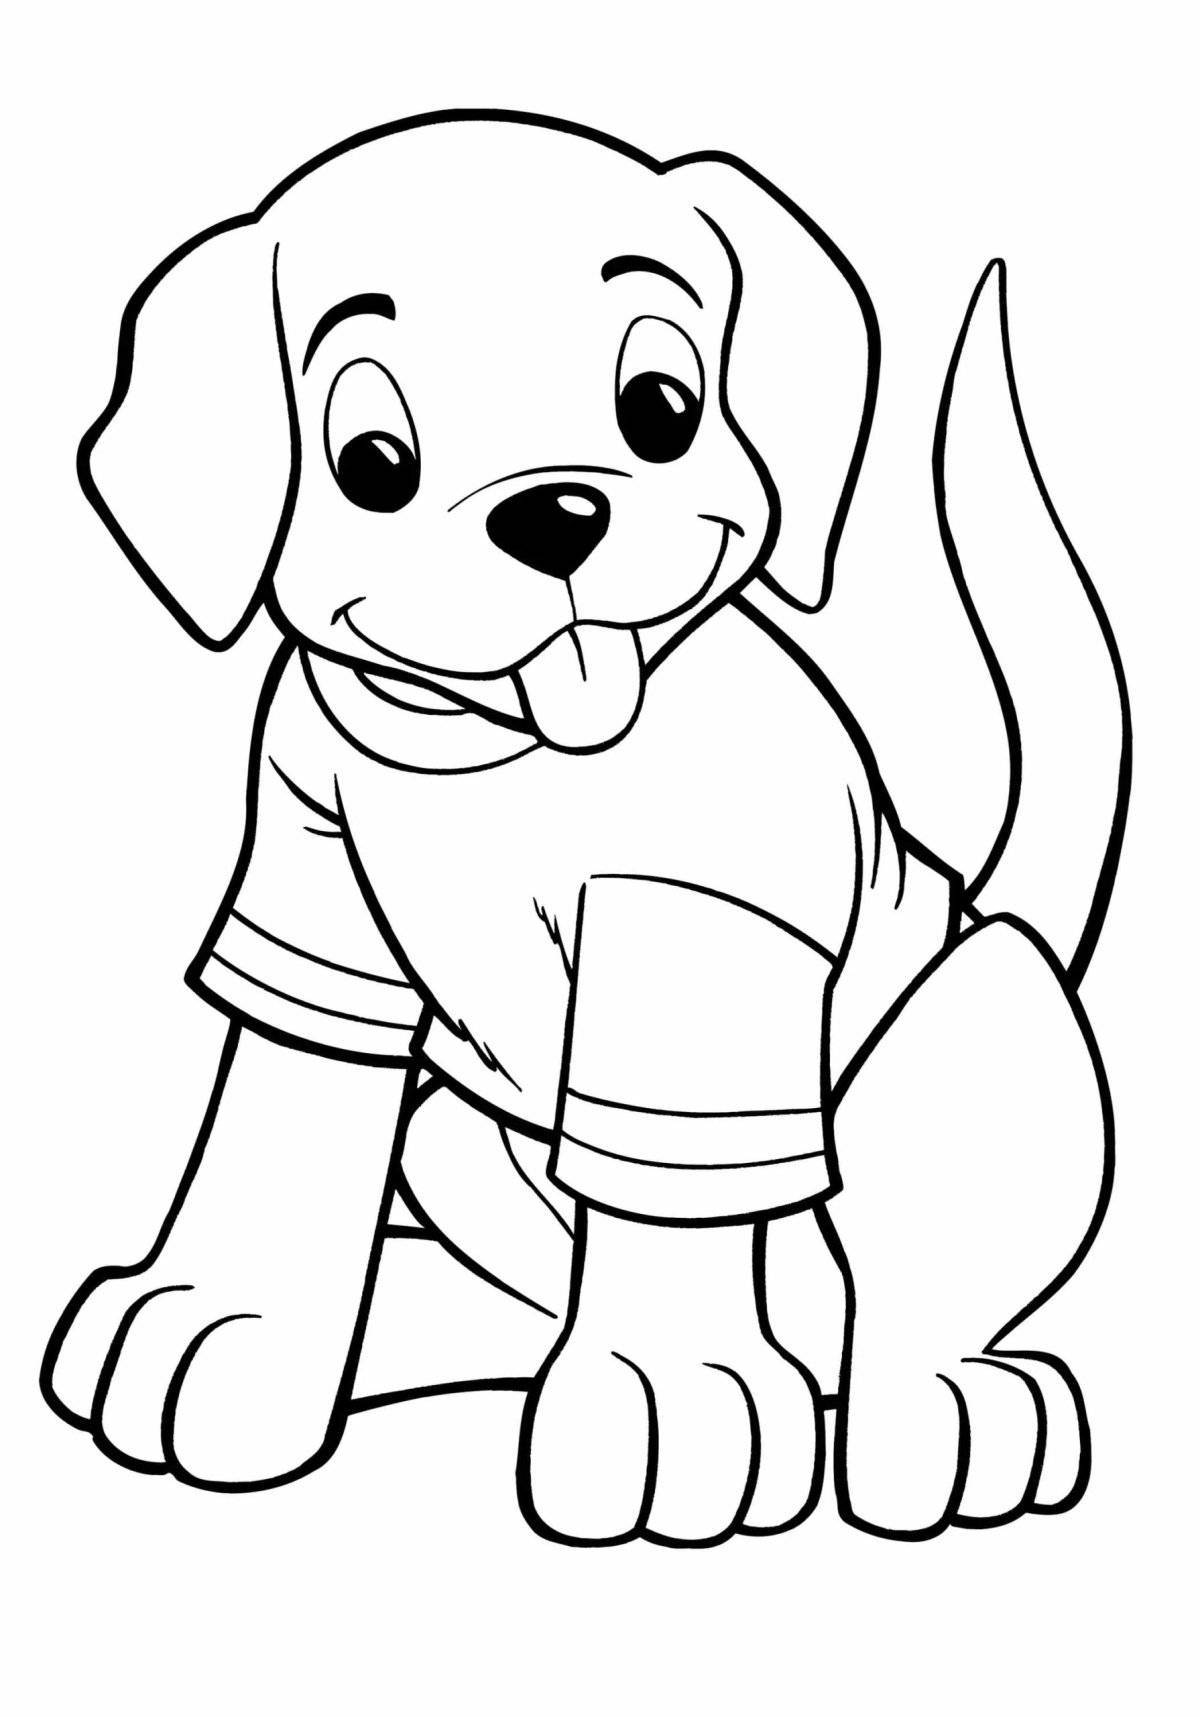 Live dog coloring book for beginners